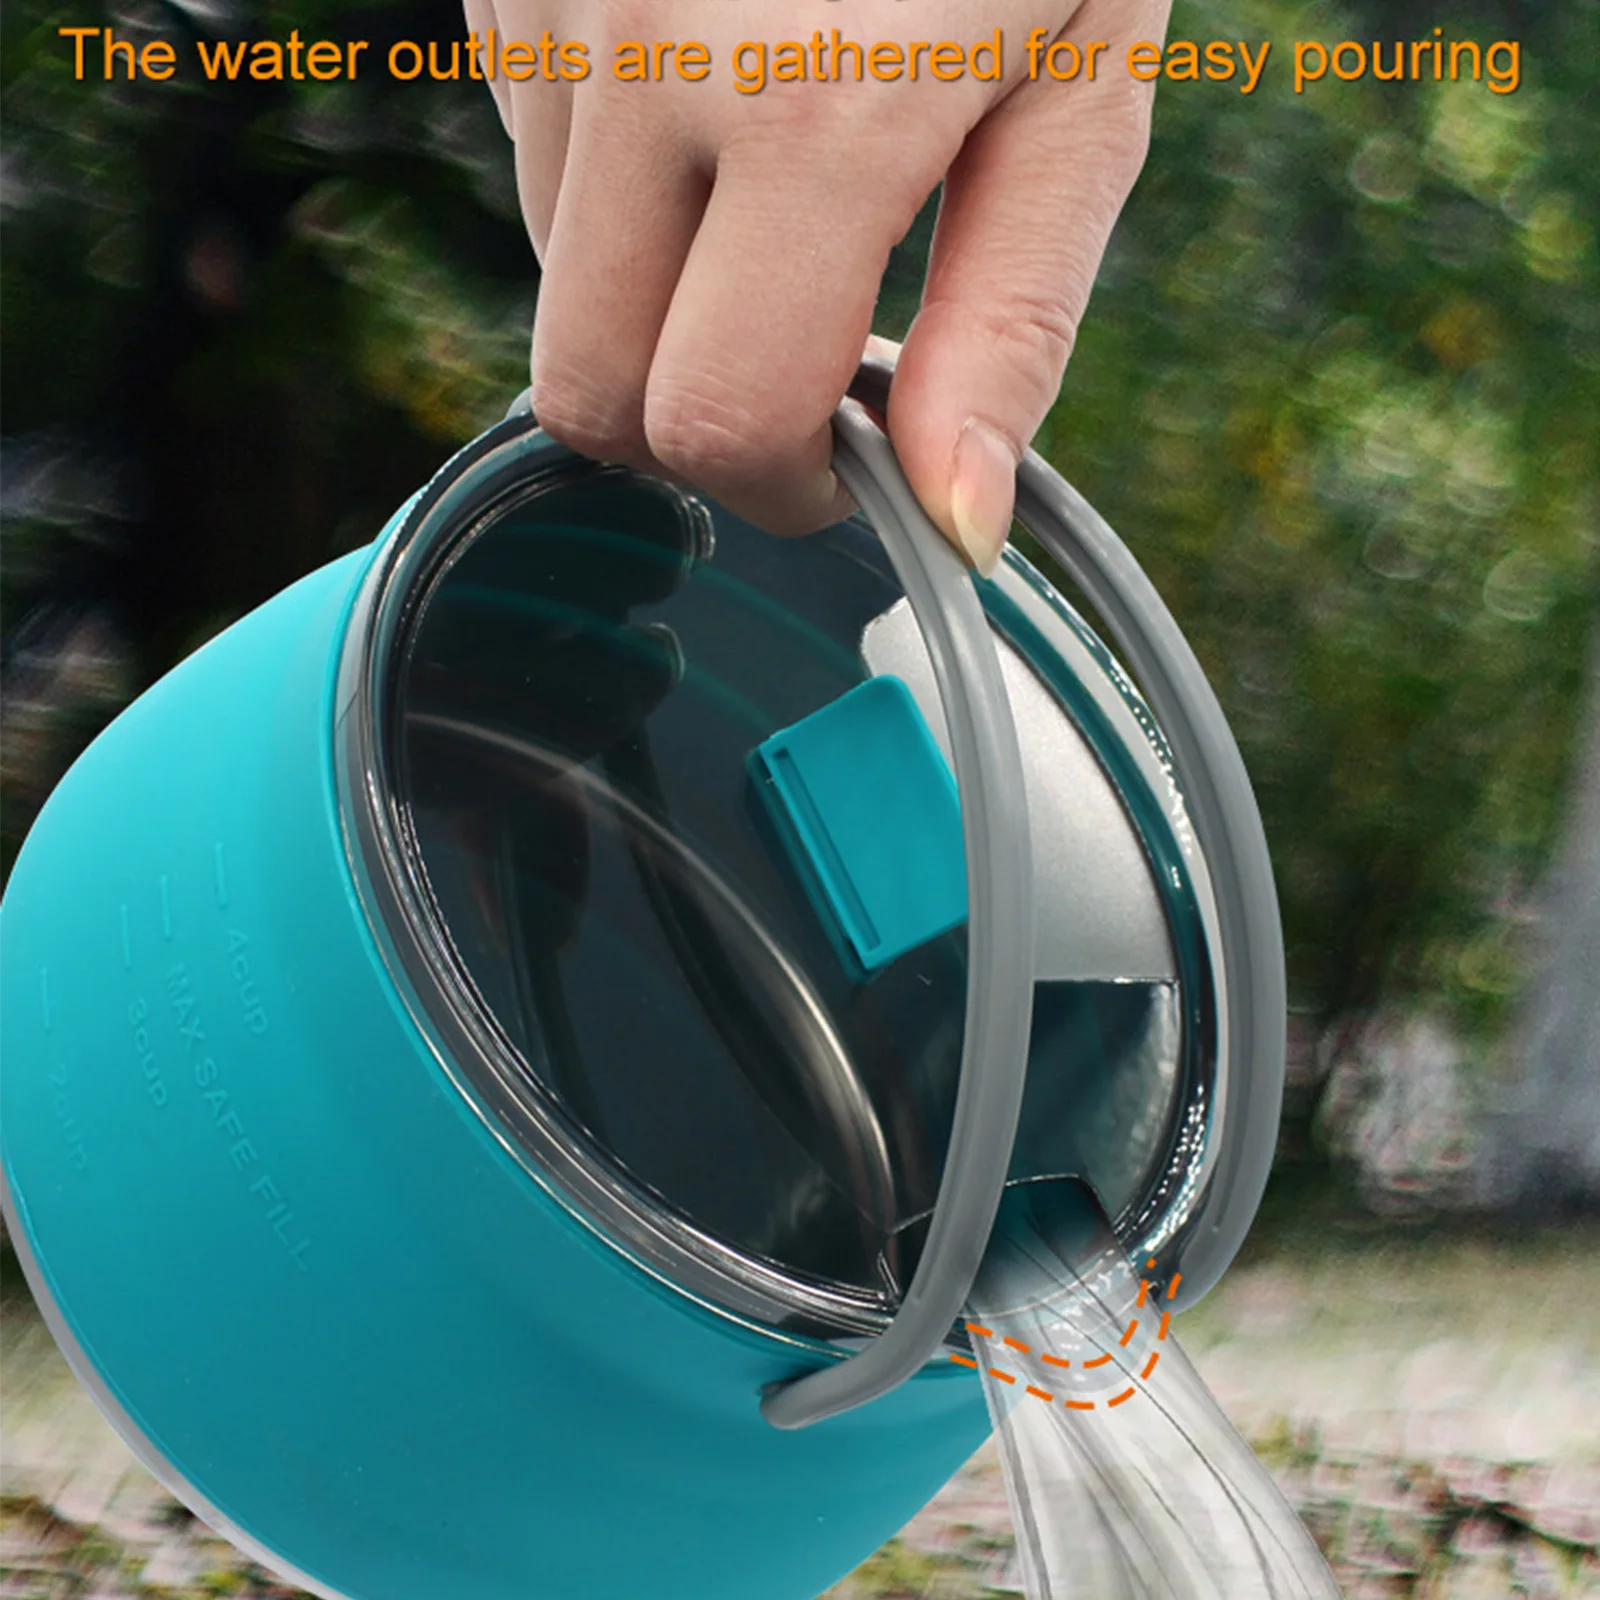 

Silicone Folding Kettle Camping Teapot Portable Coffee Tea Cooker Collapsible Mini Boiling Water Pot with Handle Hiking Supplies